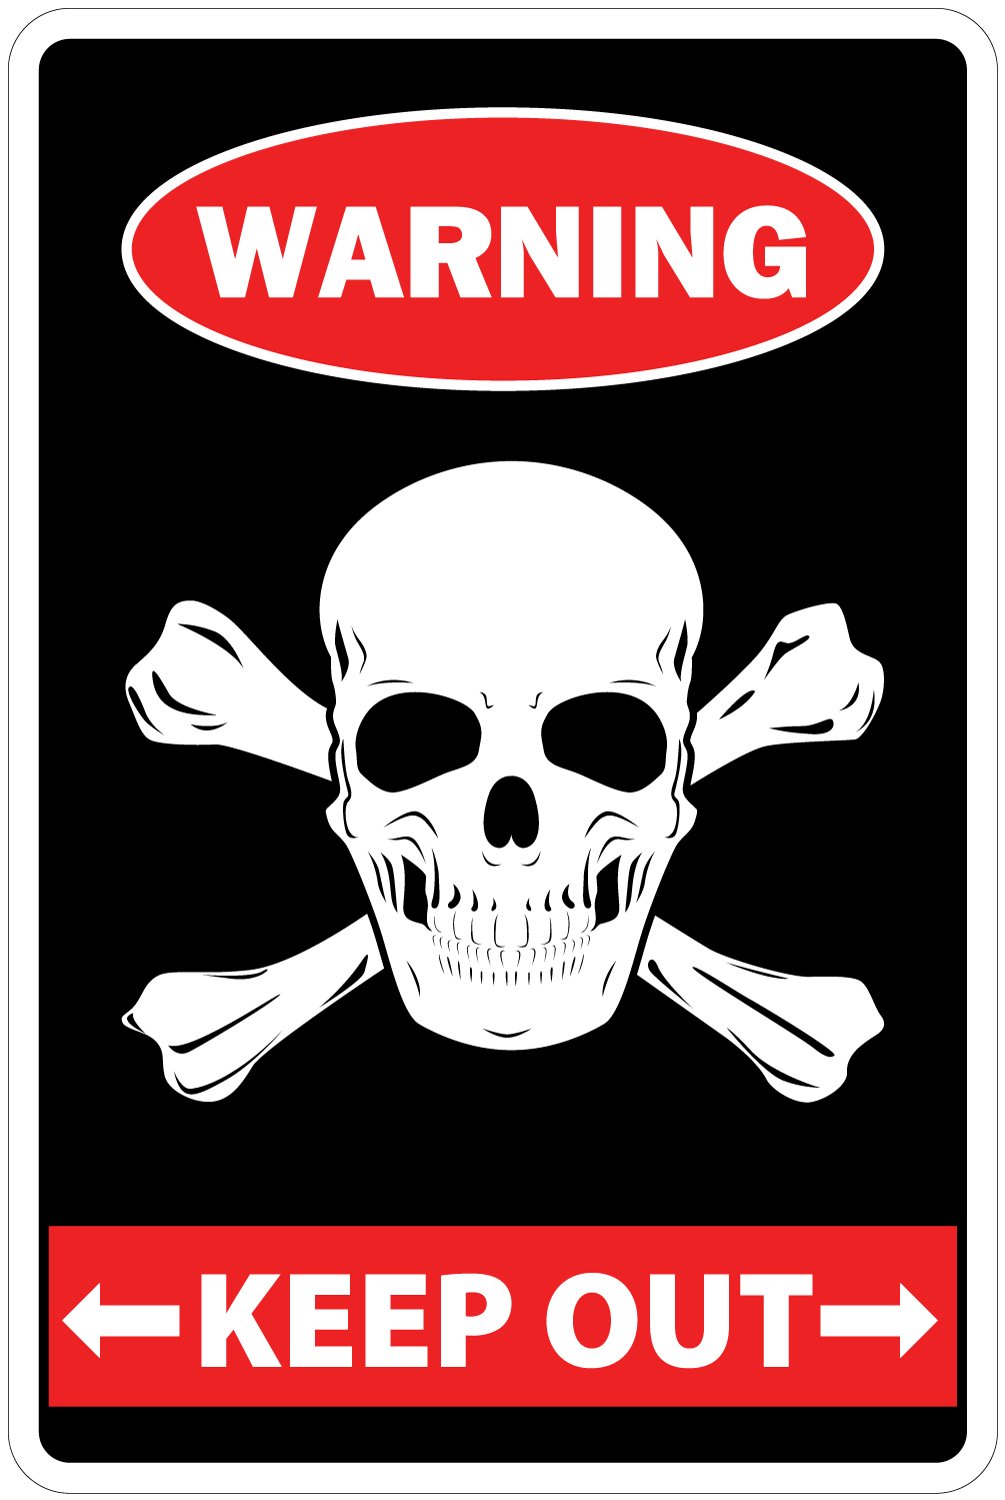 Warning sign with a skull and crossbones